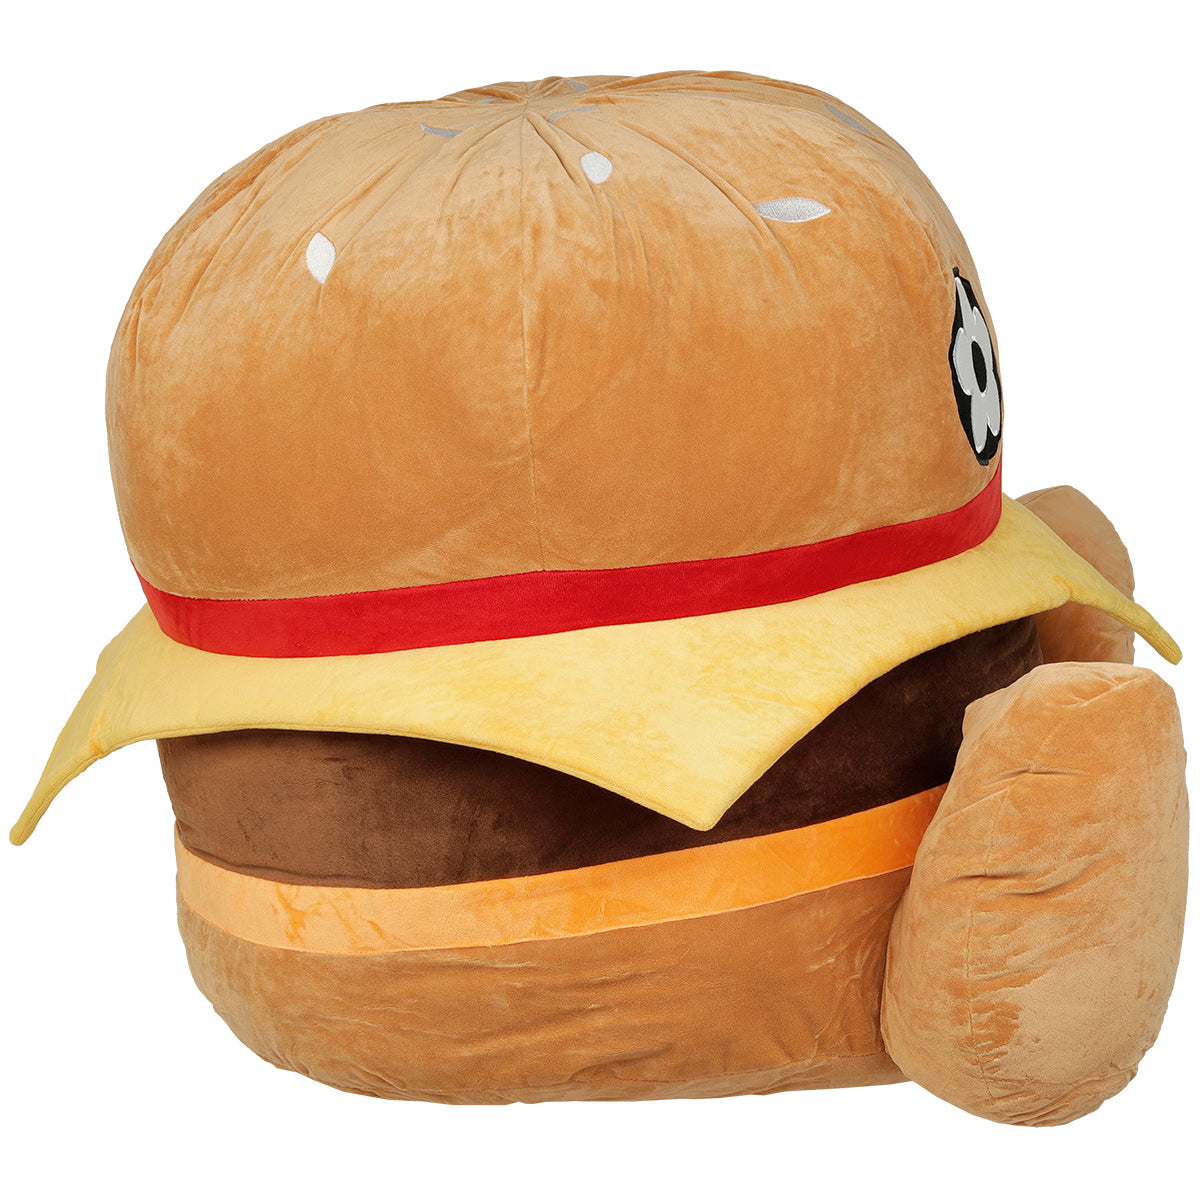 Vandy The Pink Giant Burger Plush Toy